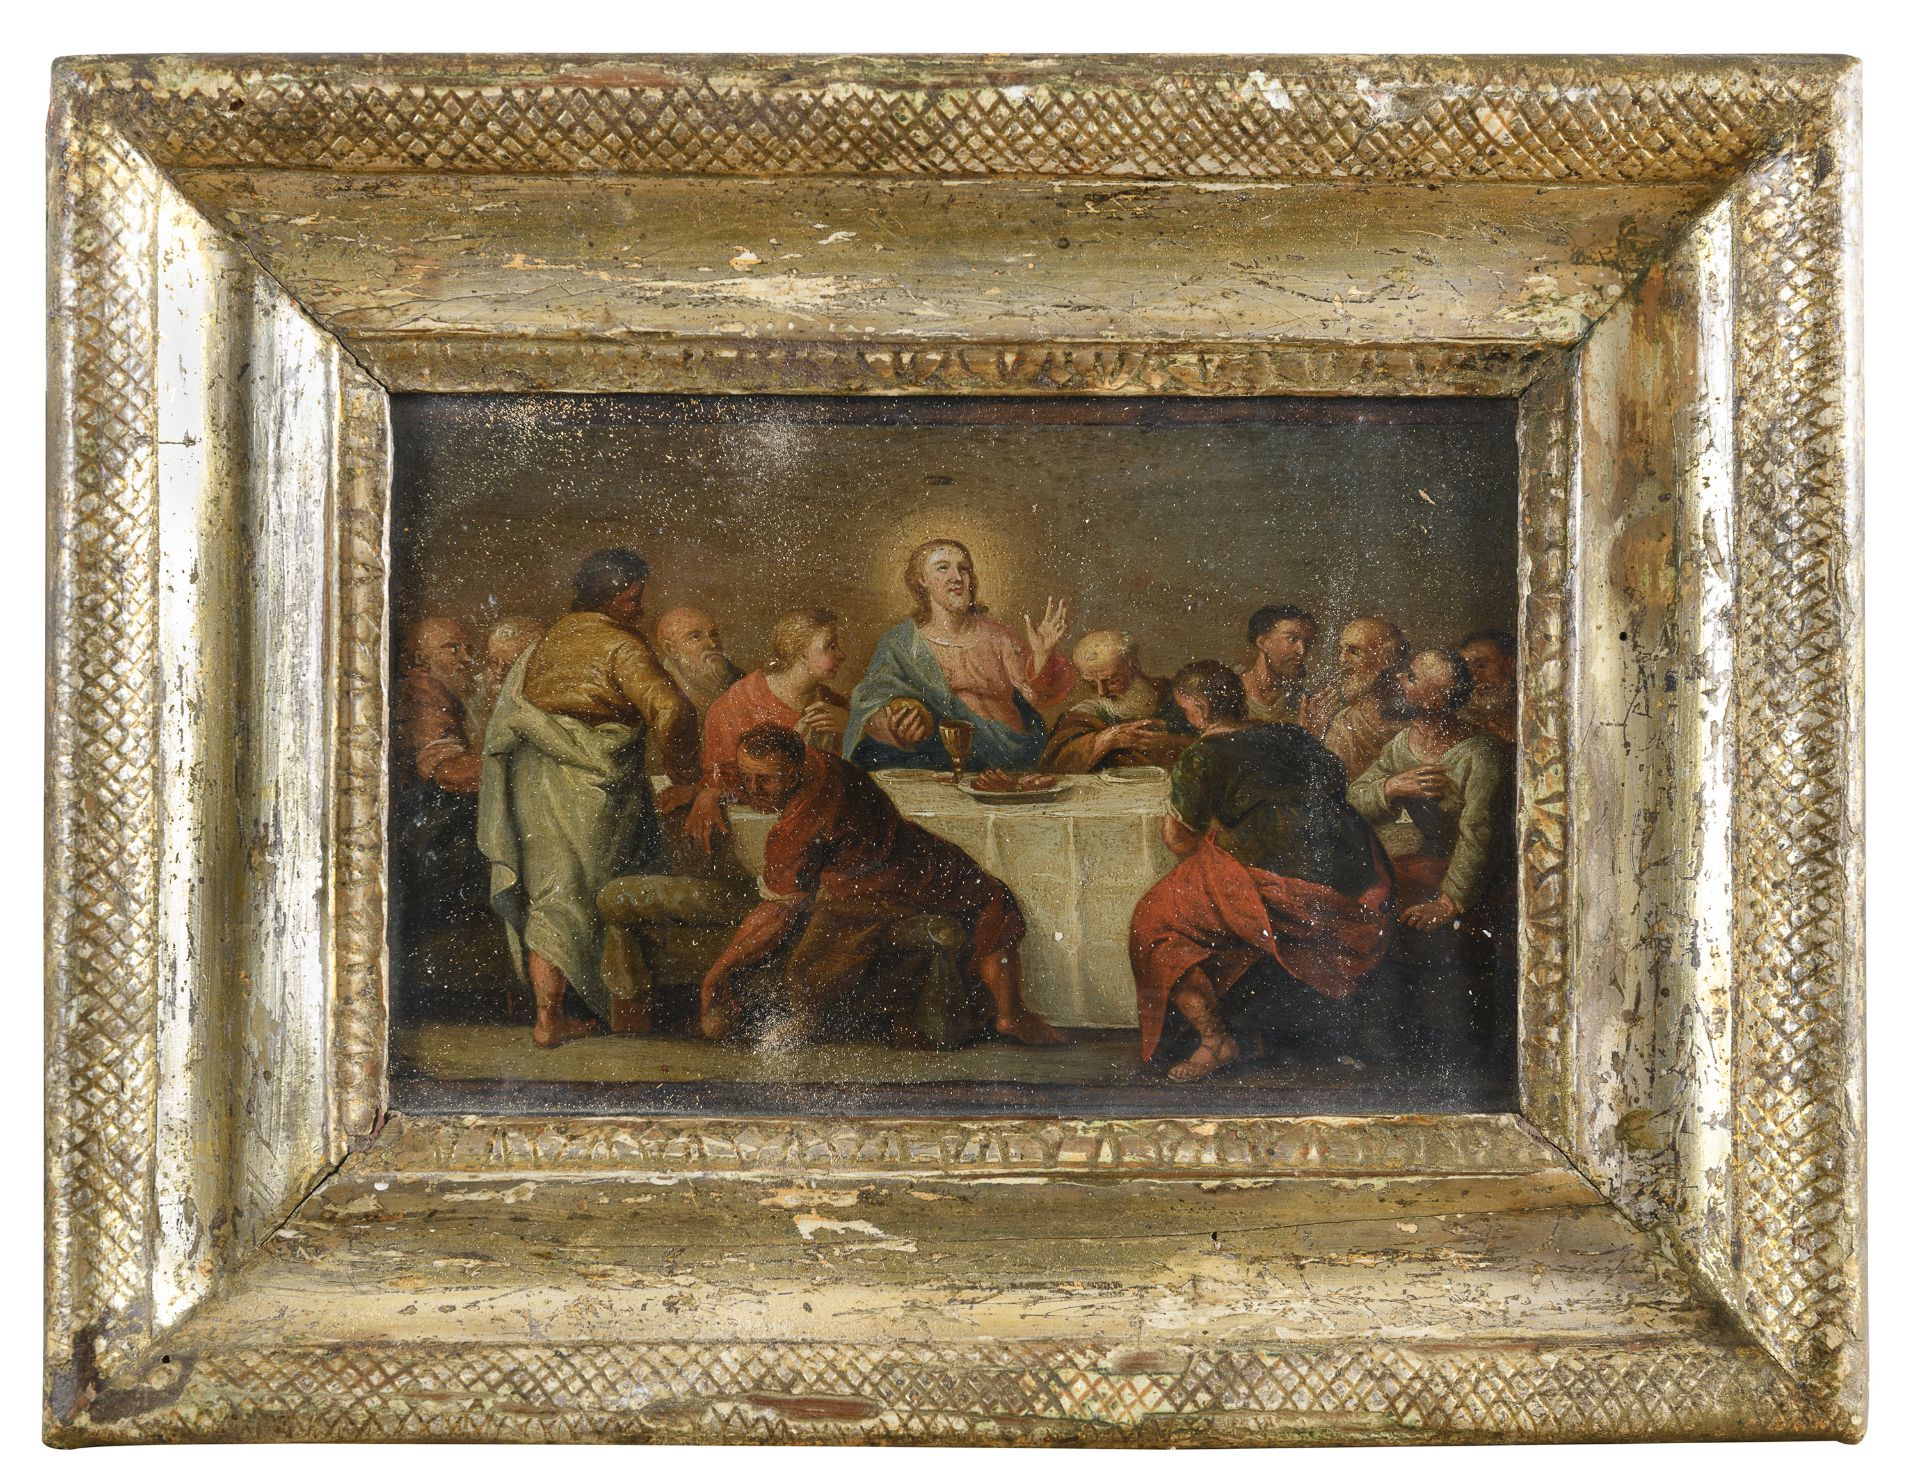 EMILIAN OIL PAINTING EARLY 19TH CENTURY